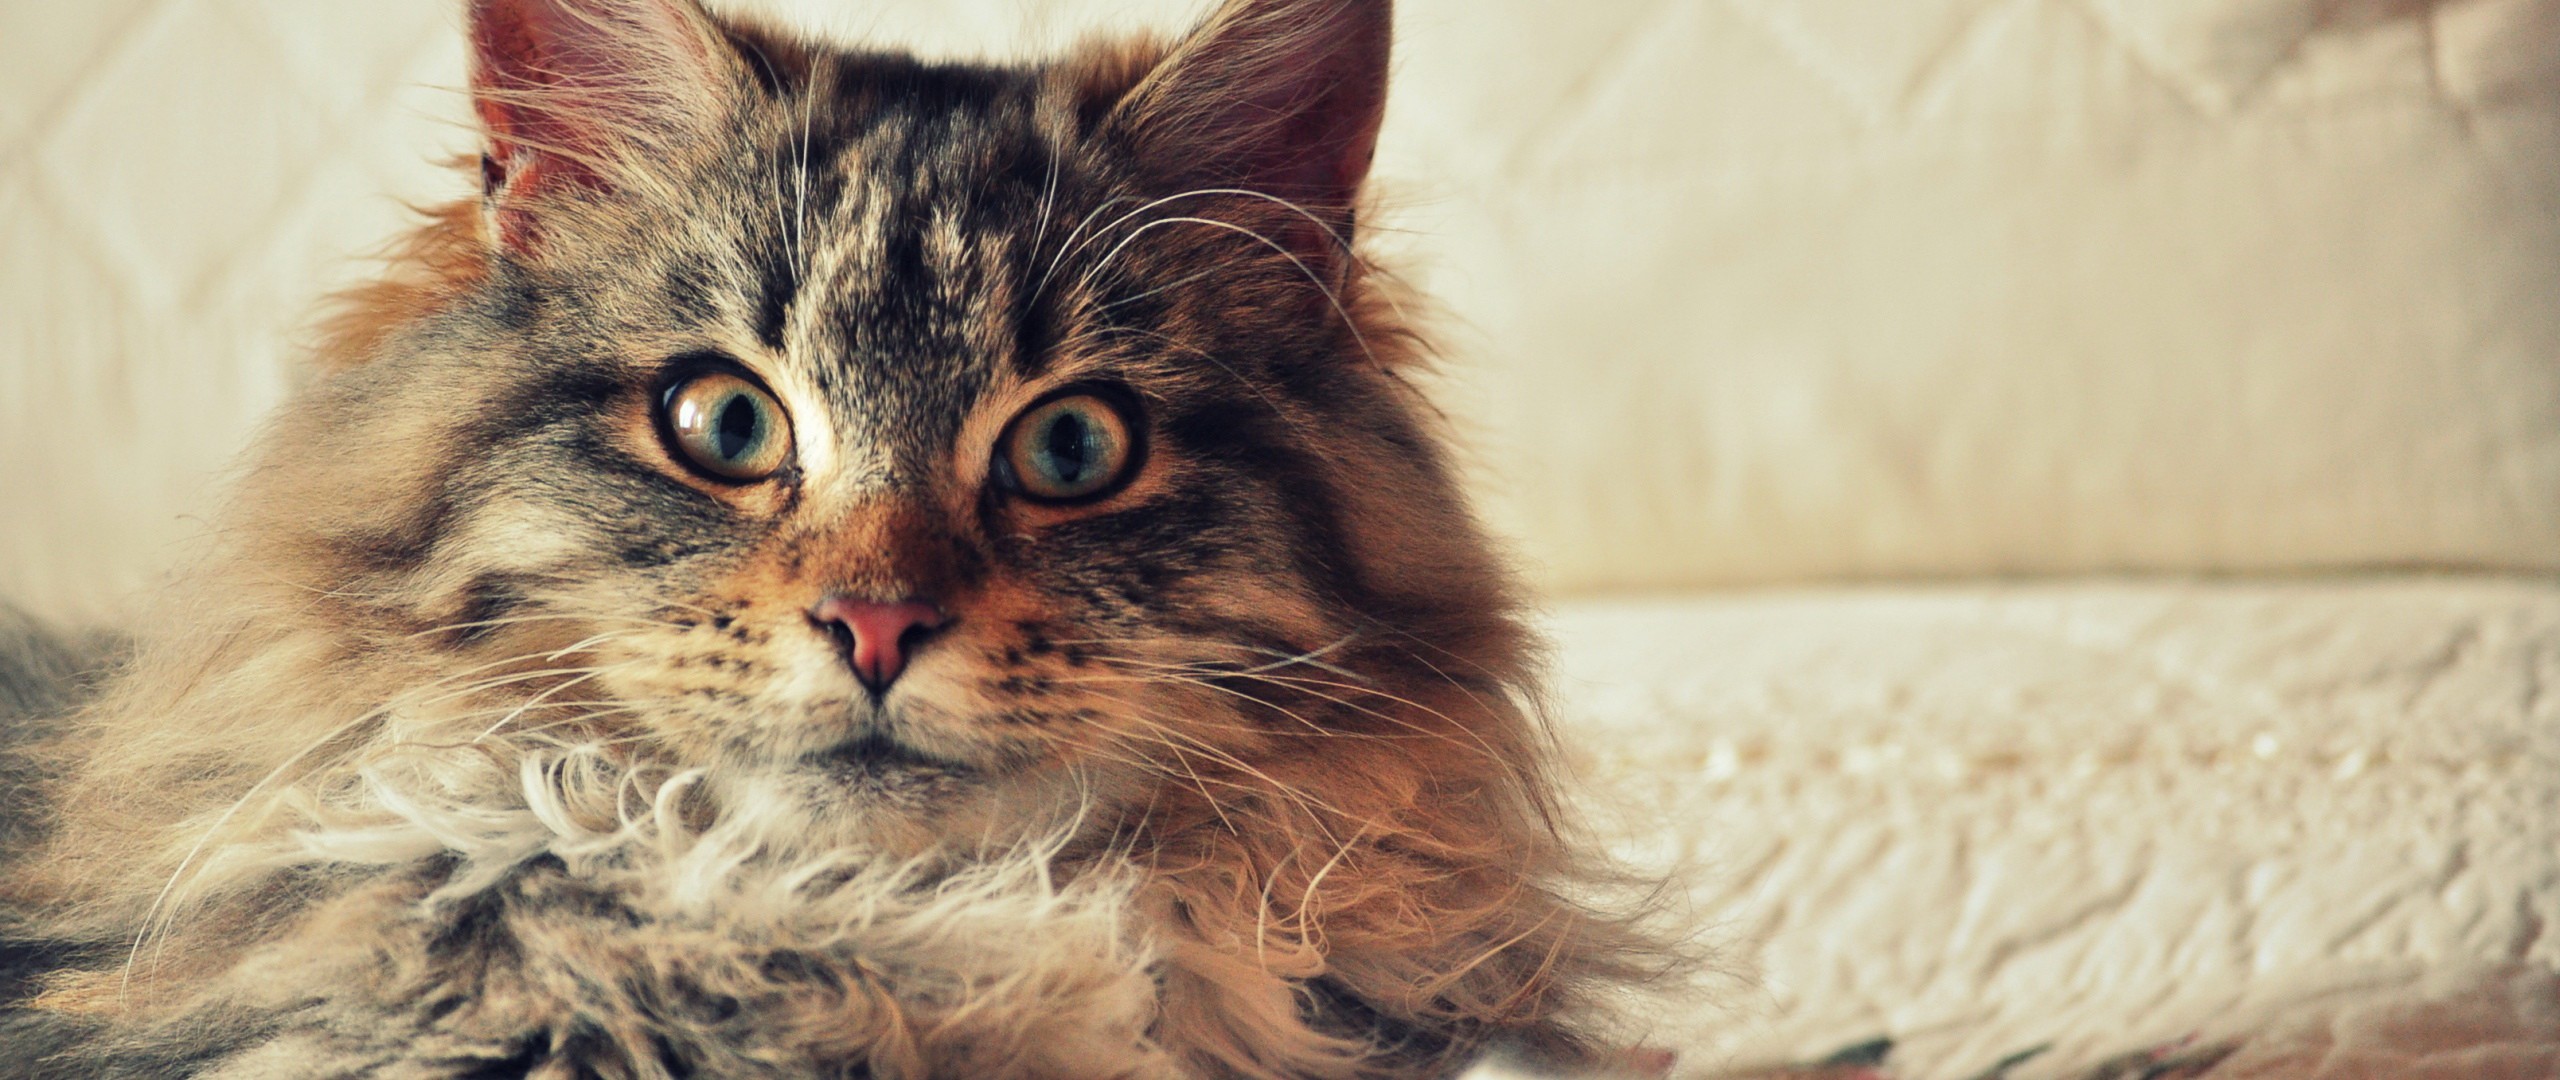 General 2560x1080 cats Maine Coon animals mammals indoors animal eyes